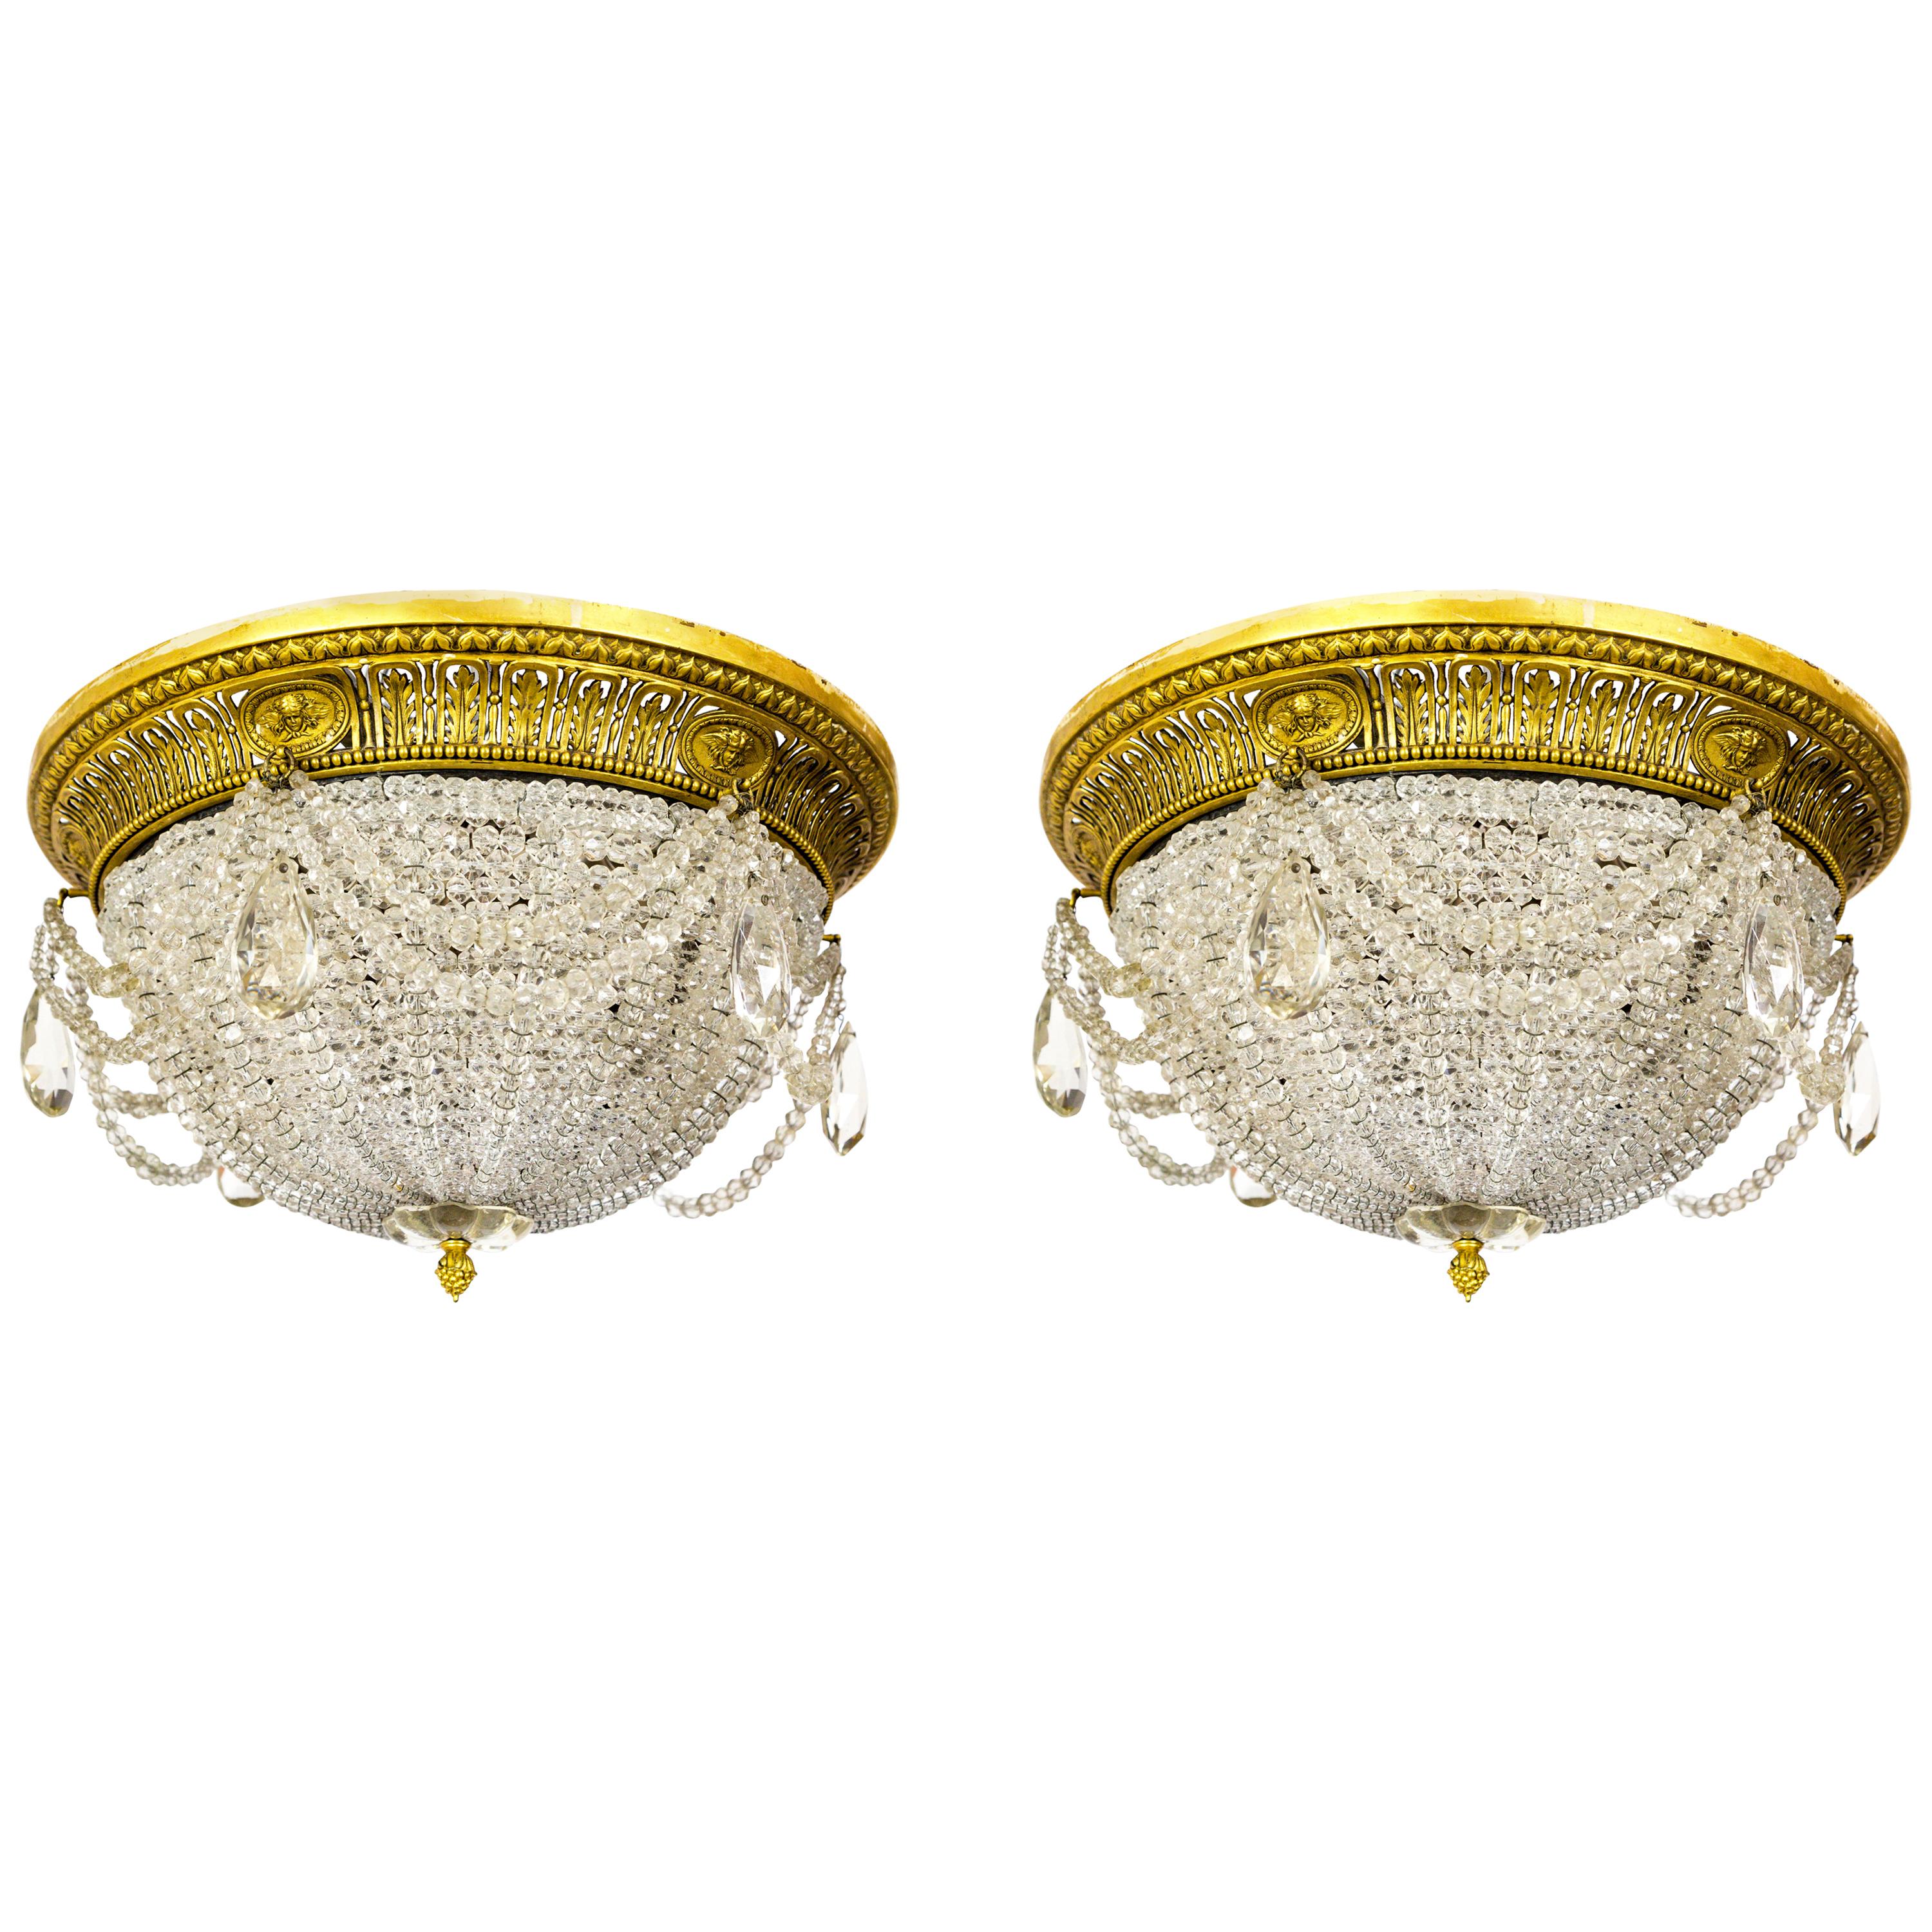 Neoclassical Style Beaded Crystal Dome Flush Mounts, Pair